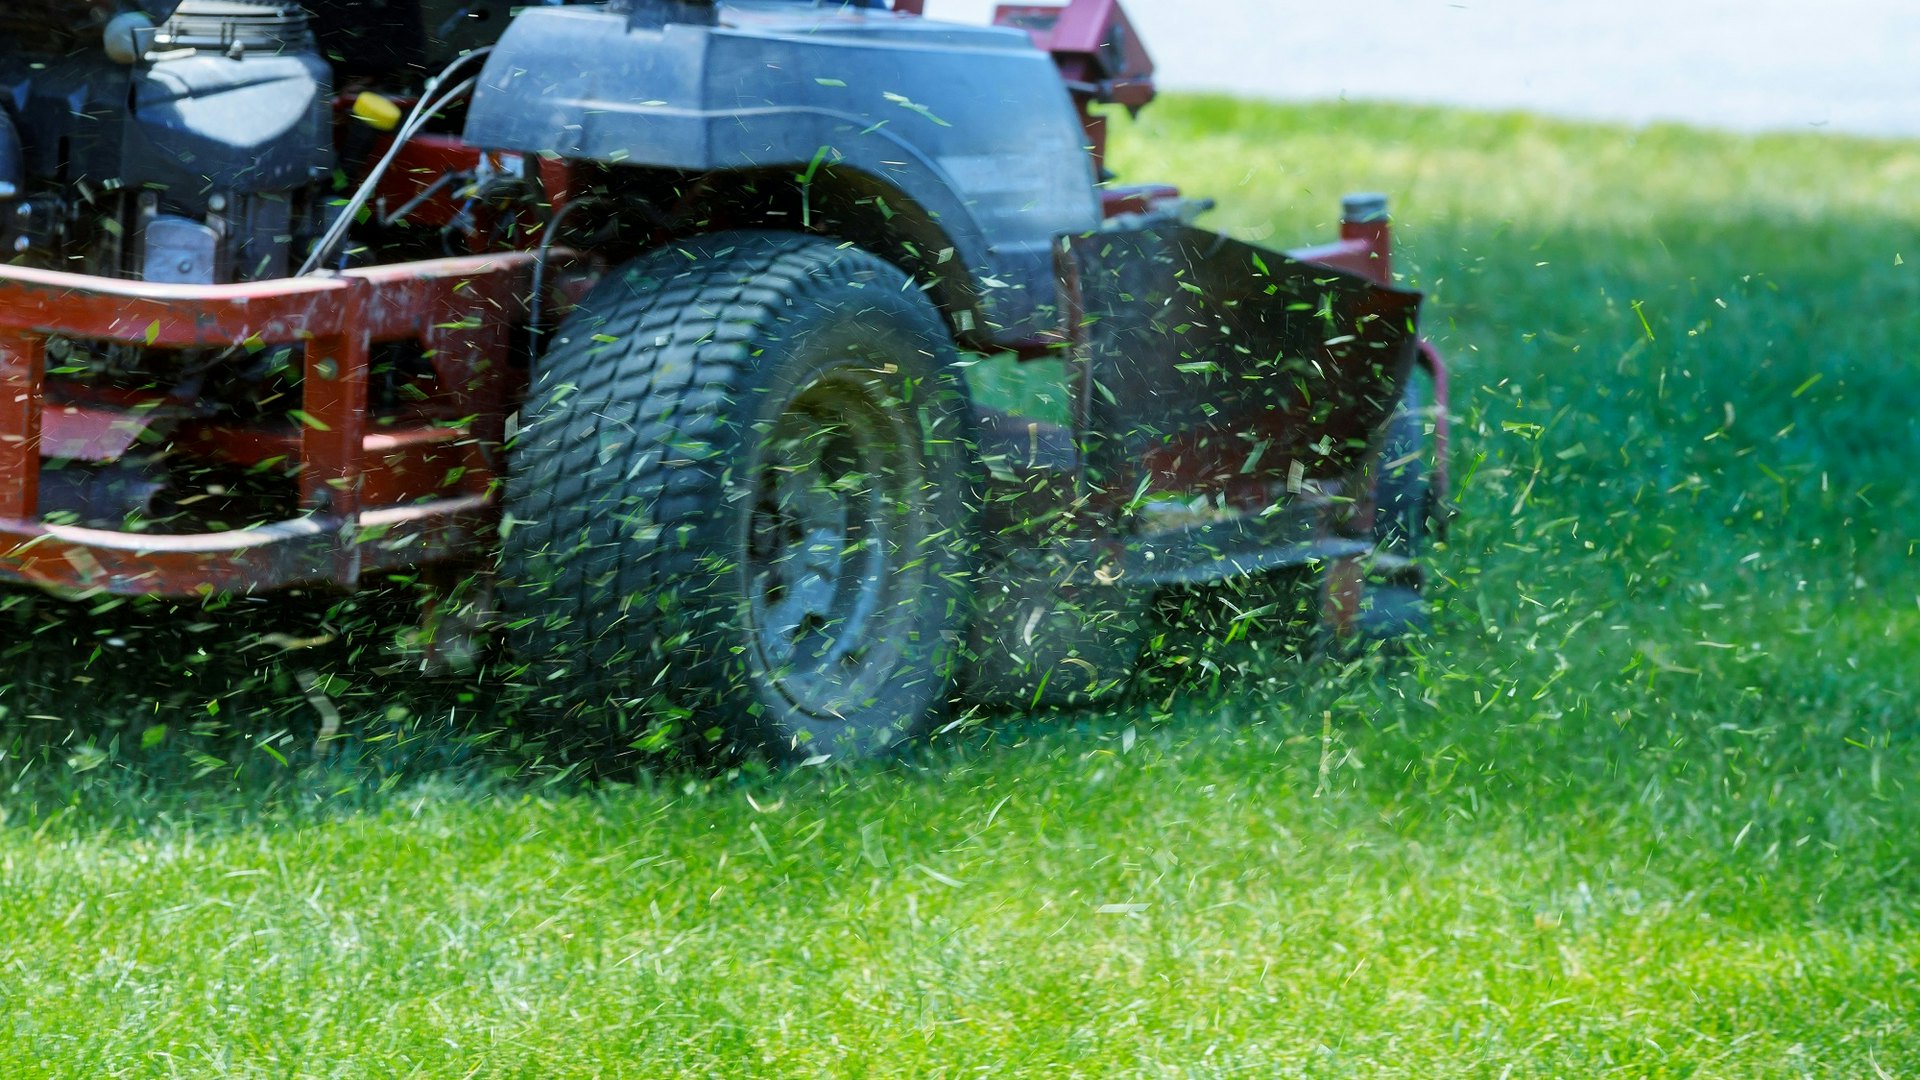 Busy lawn care business owners need to examine the business within the context of the following questions as they begin to plan for the future and determine if acquisition is the best course of action.